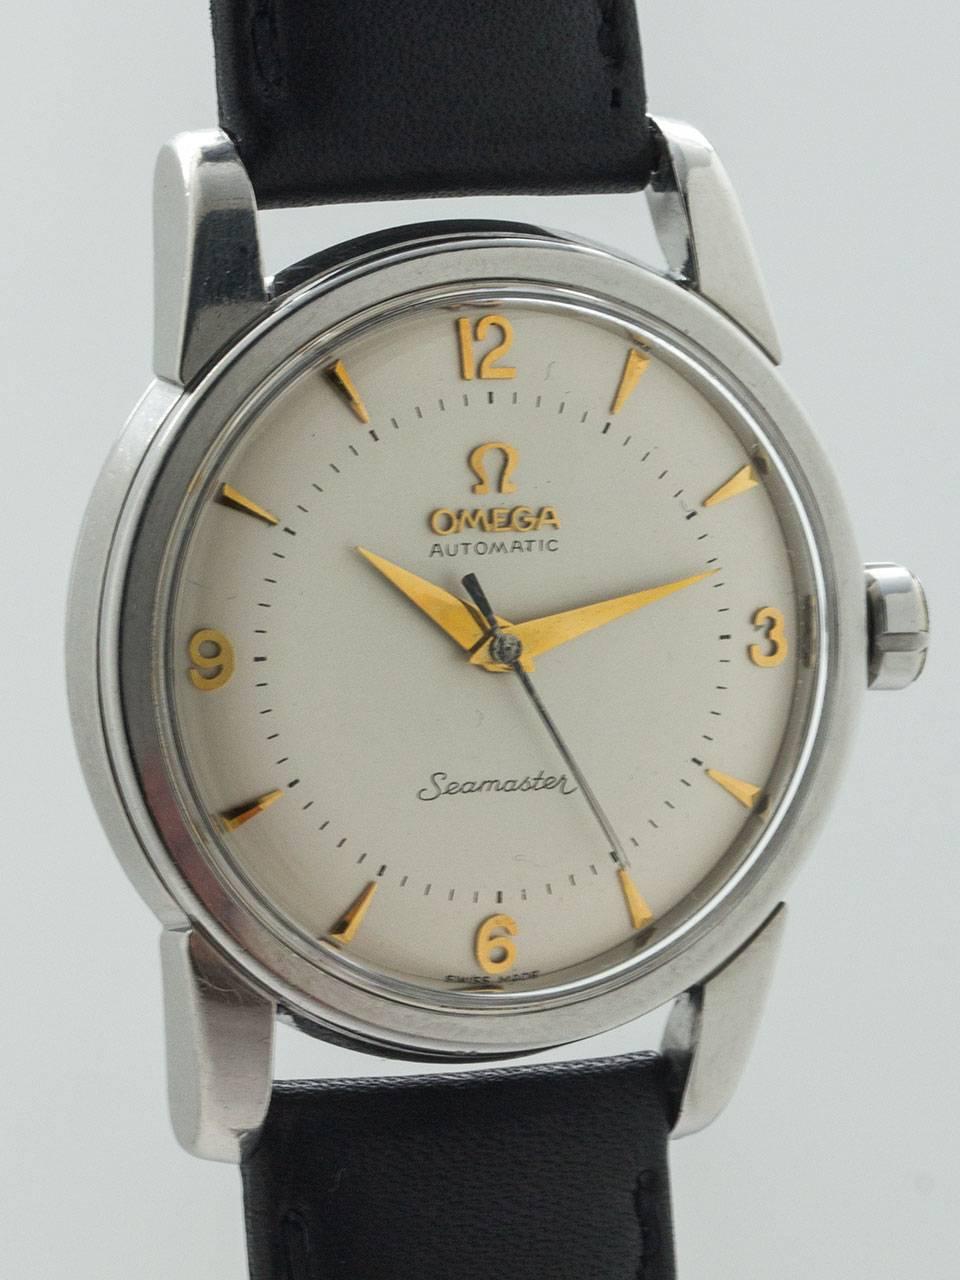 Omega Stainless Steel Seamaster Automatic Wristwatch circa 1950s. 34 X 42mm heavy snap back case with acrylic crystal. Very pleasing original matte silvered dial with gold applied indexes and gold tapered alpha hands. Powered by self winding